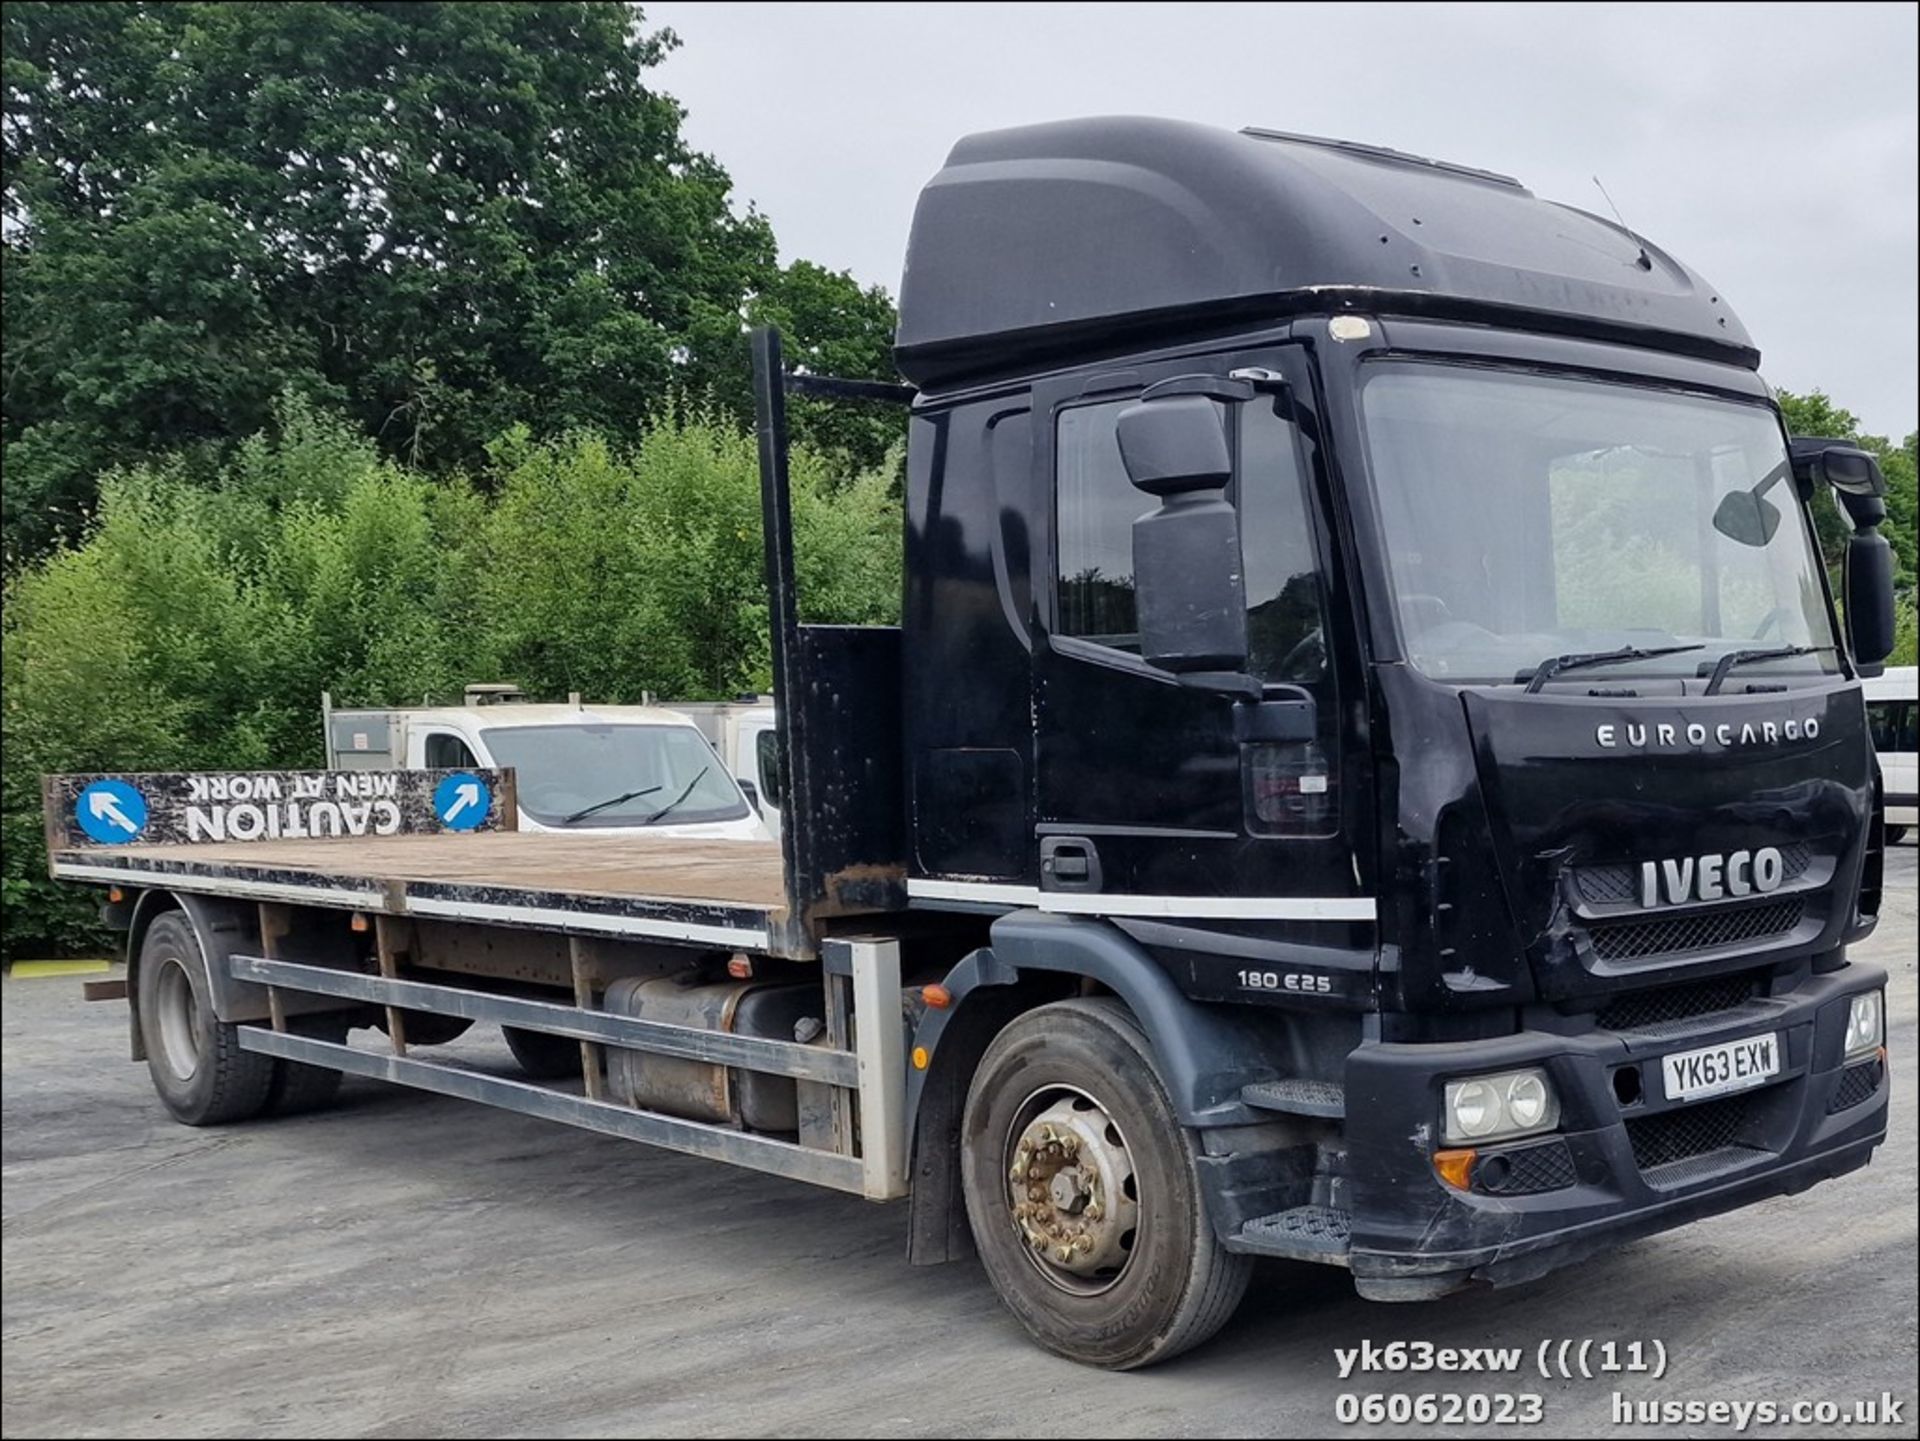 13/63 IVECO EUROCARGO (MY 2008) - 5880cc 2dr Flat Bed (Black)